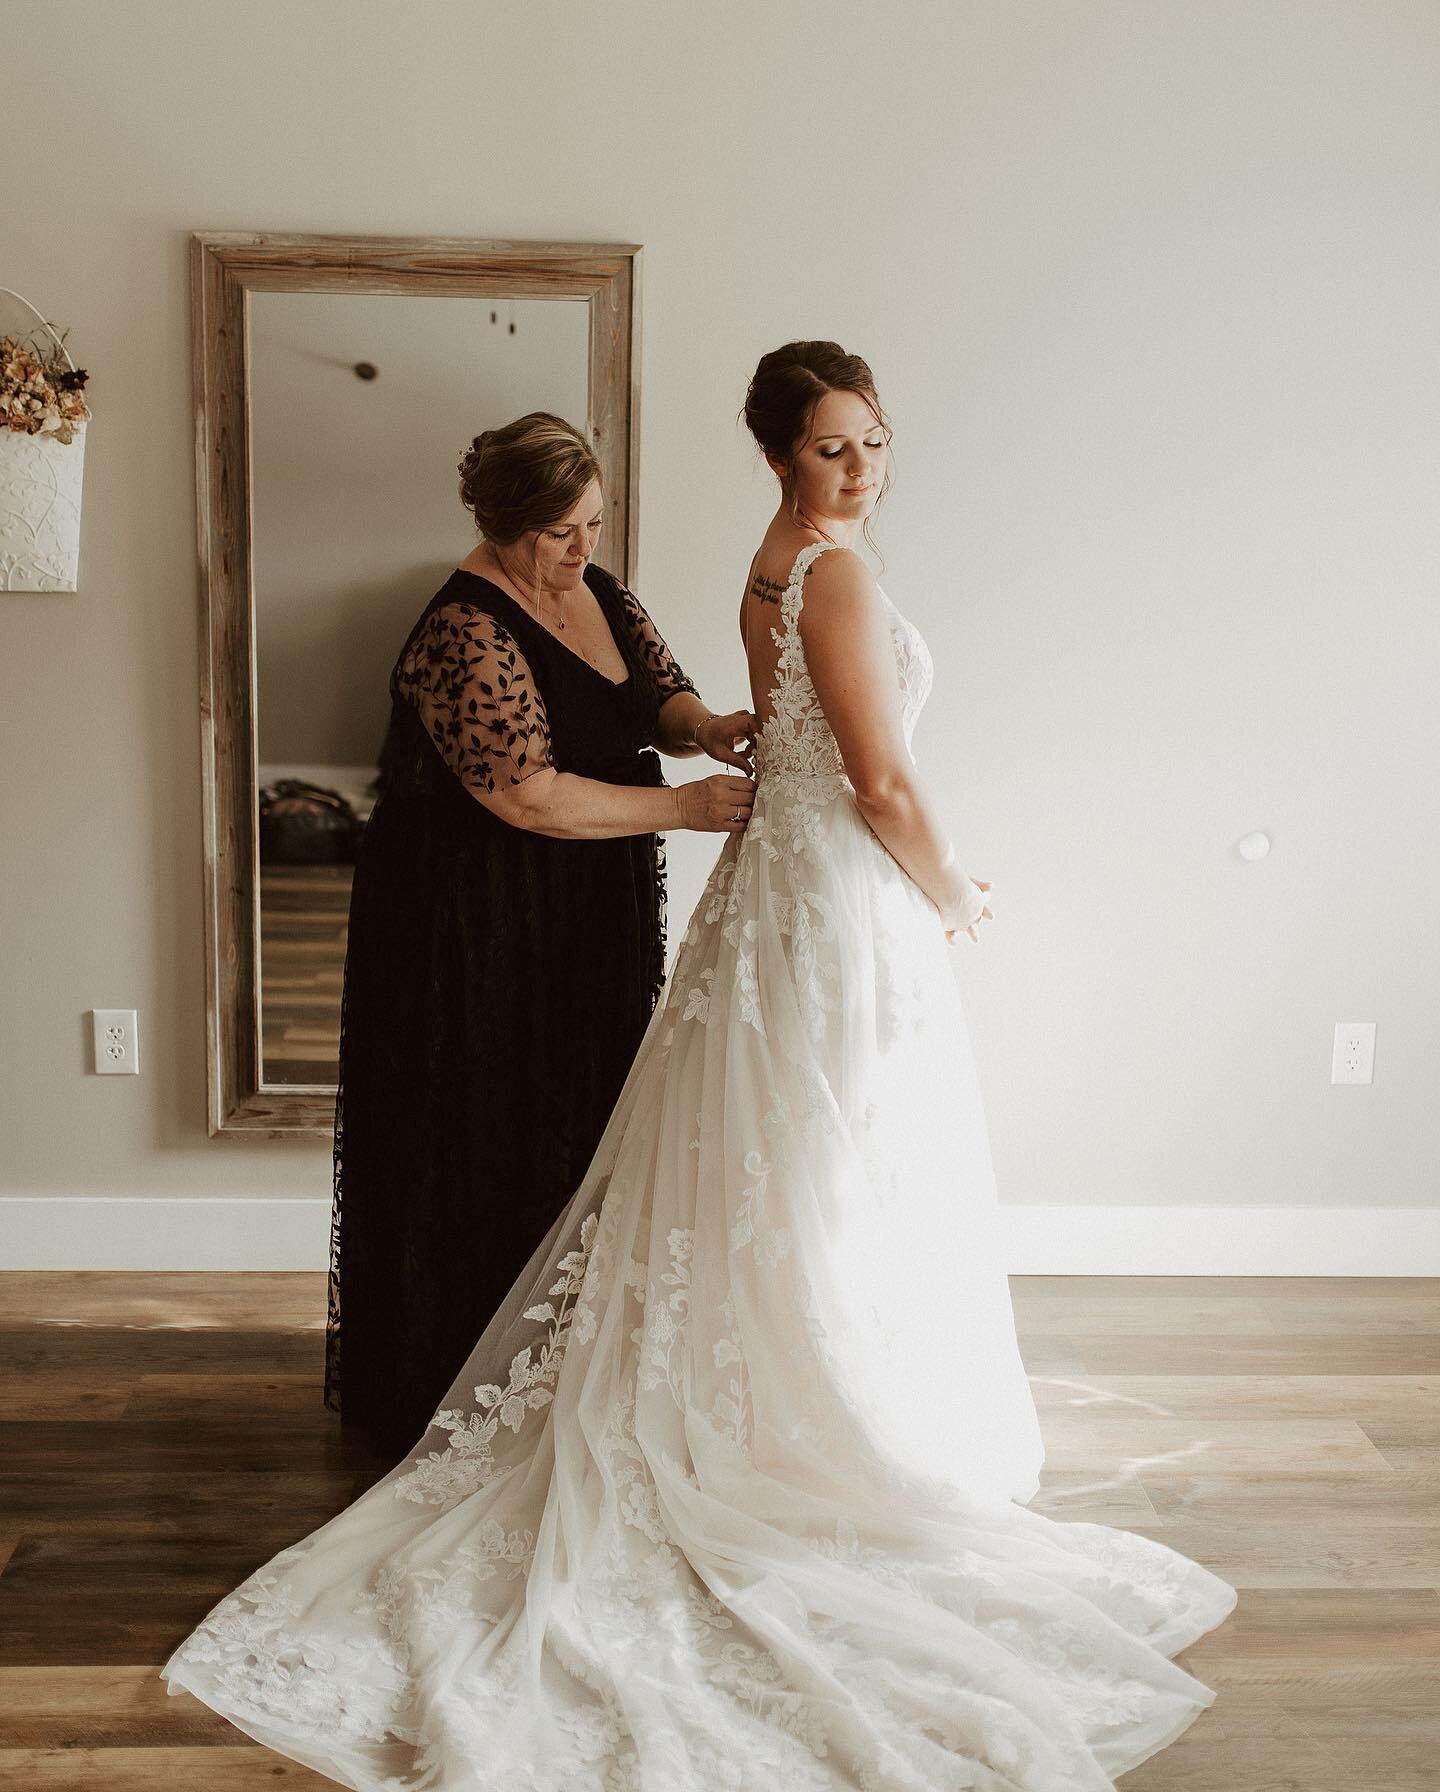 Happy Mother&rsquo;s Day to all the moms out there!  We are so thankful for all that you do!! 
&bull;
&bull;
&bull;
&bull;
&bull;
&bull;
#mothersday #mothers #weddingphotography #wedding #weddingday #momlife #bride #midwestphotographer #wichitabride 